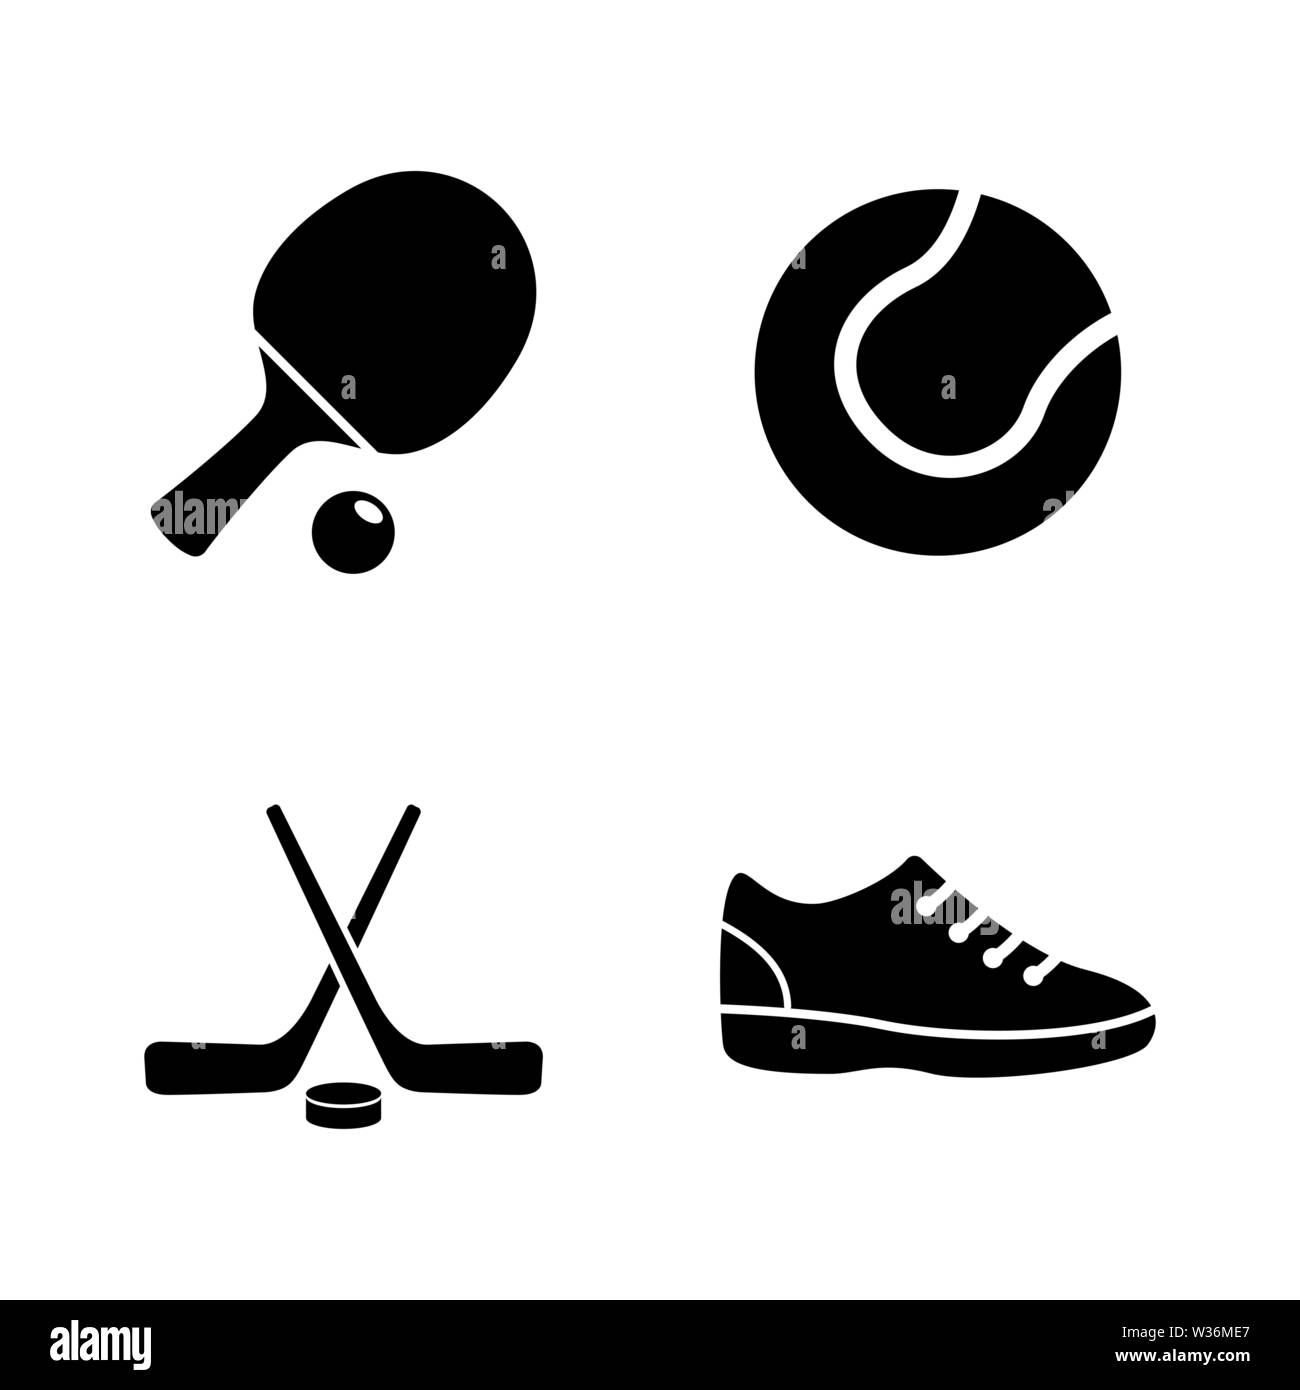 Sport Equipment. Simple Related Vector Icons Set for Video, Mobile Apps, Web Sites, Print Projects and Your Design. Sport Equipment icon Black Flat Il Stock Vector